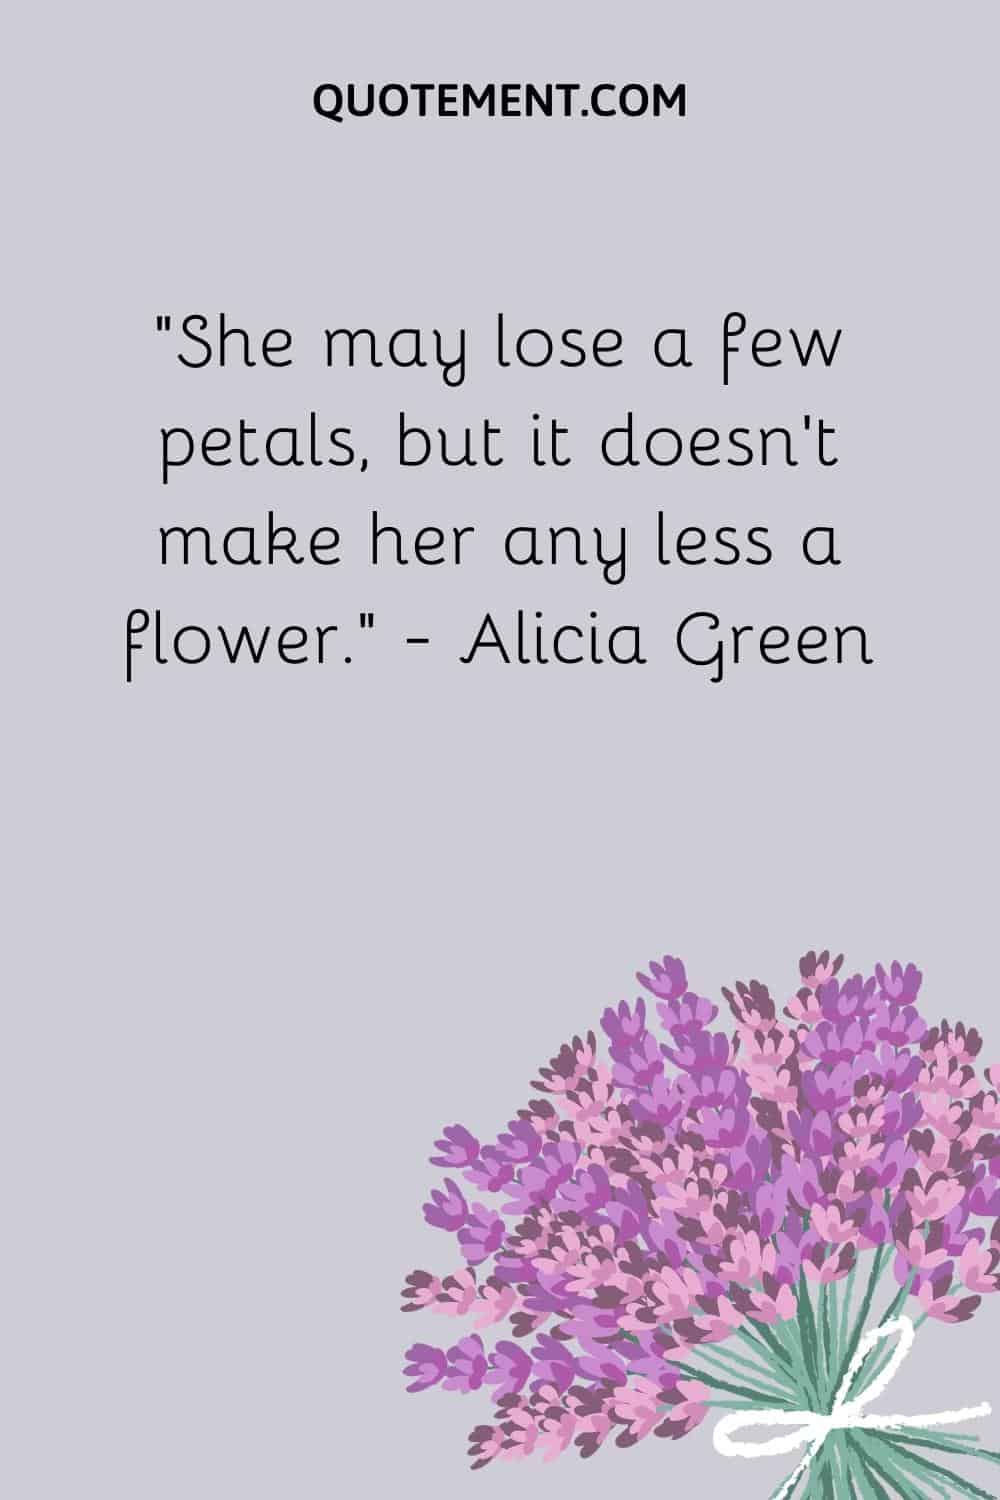 “She may lose a few petals, but it doesn’t make her any less a flower.” — Alicia Green